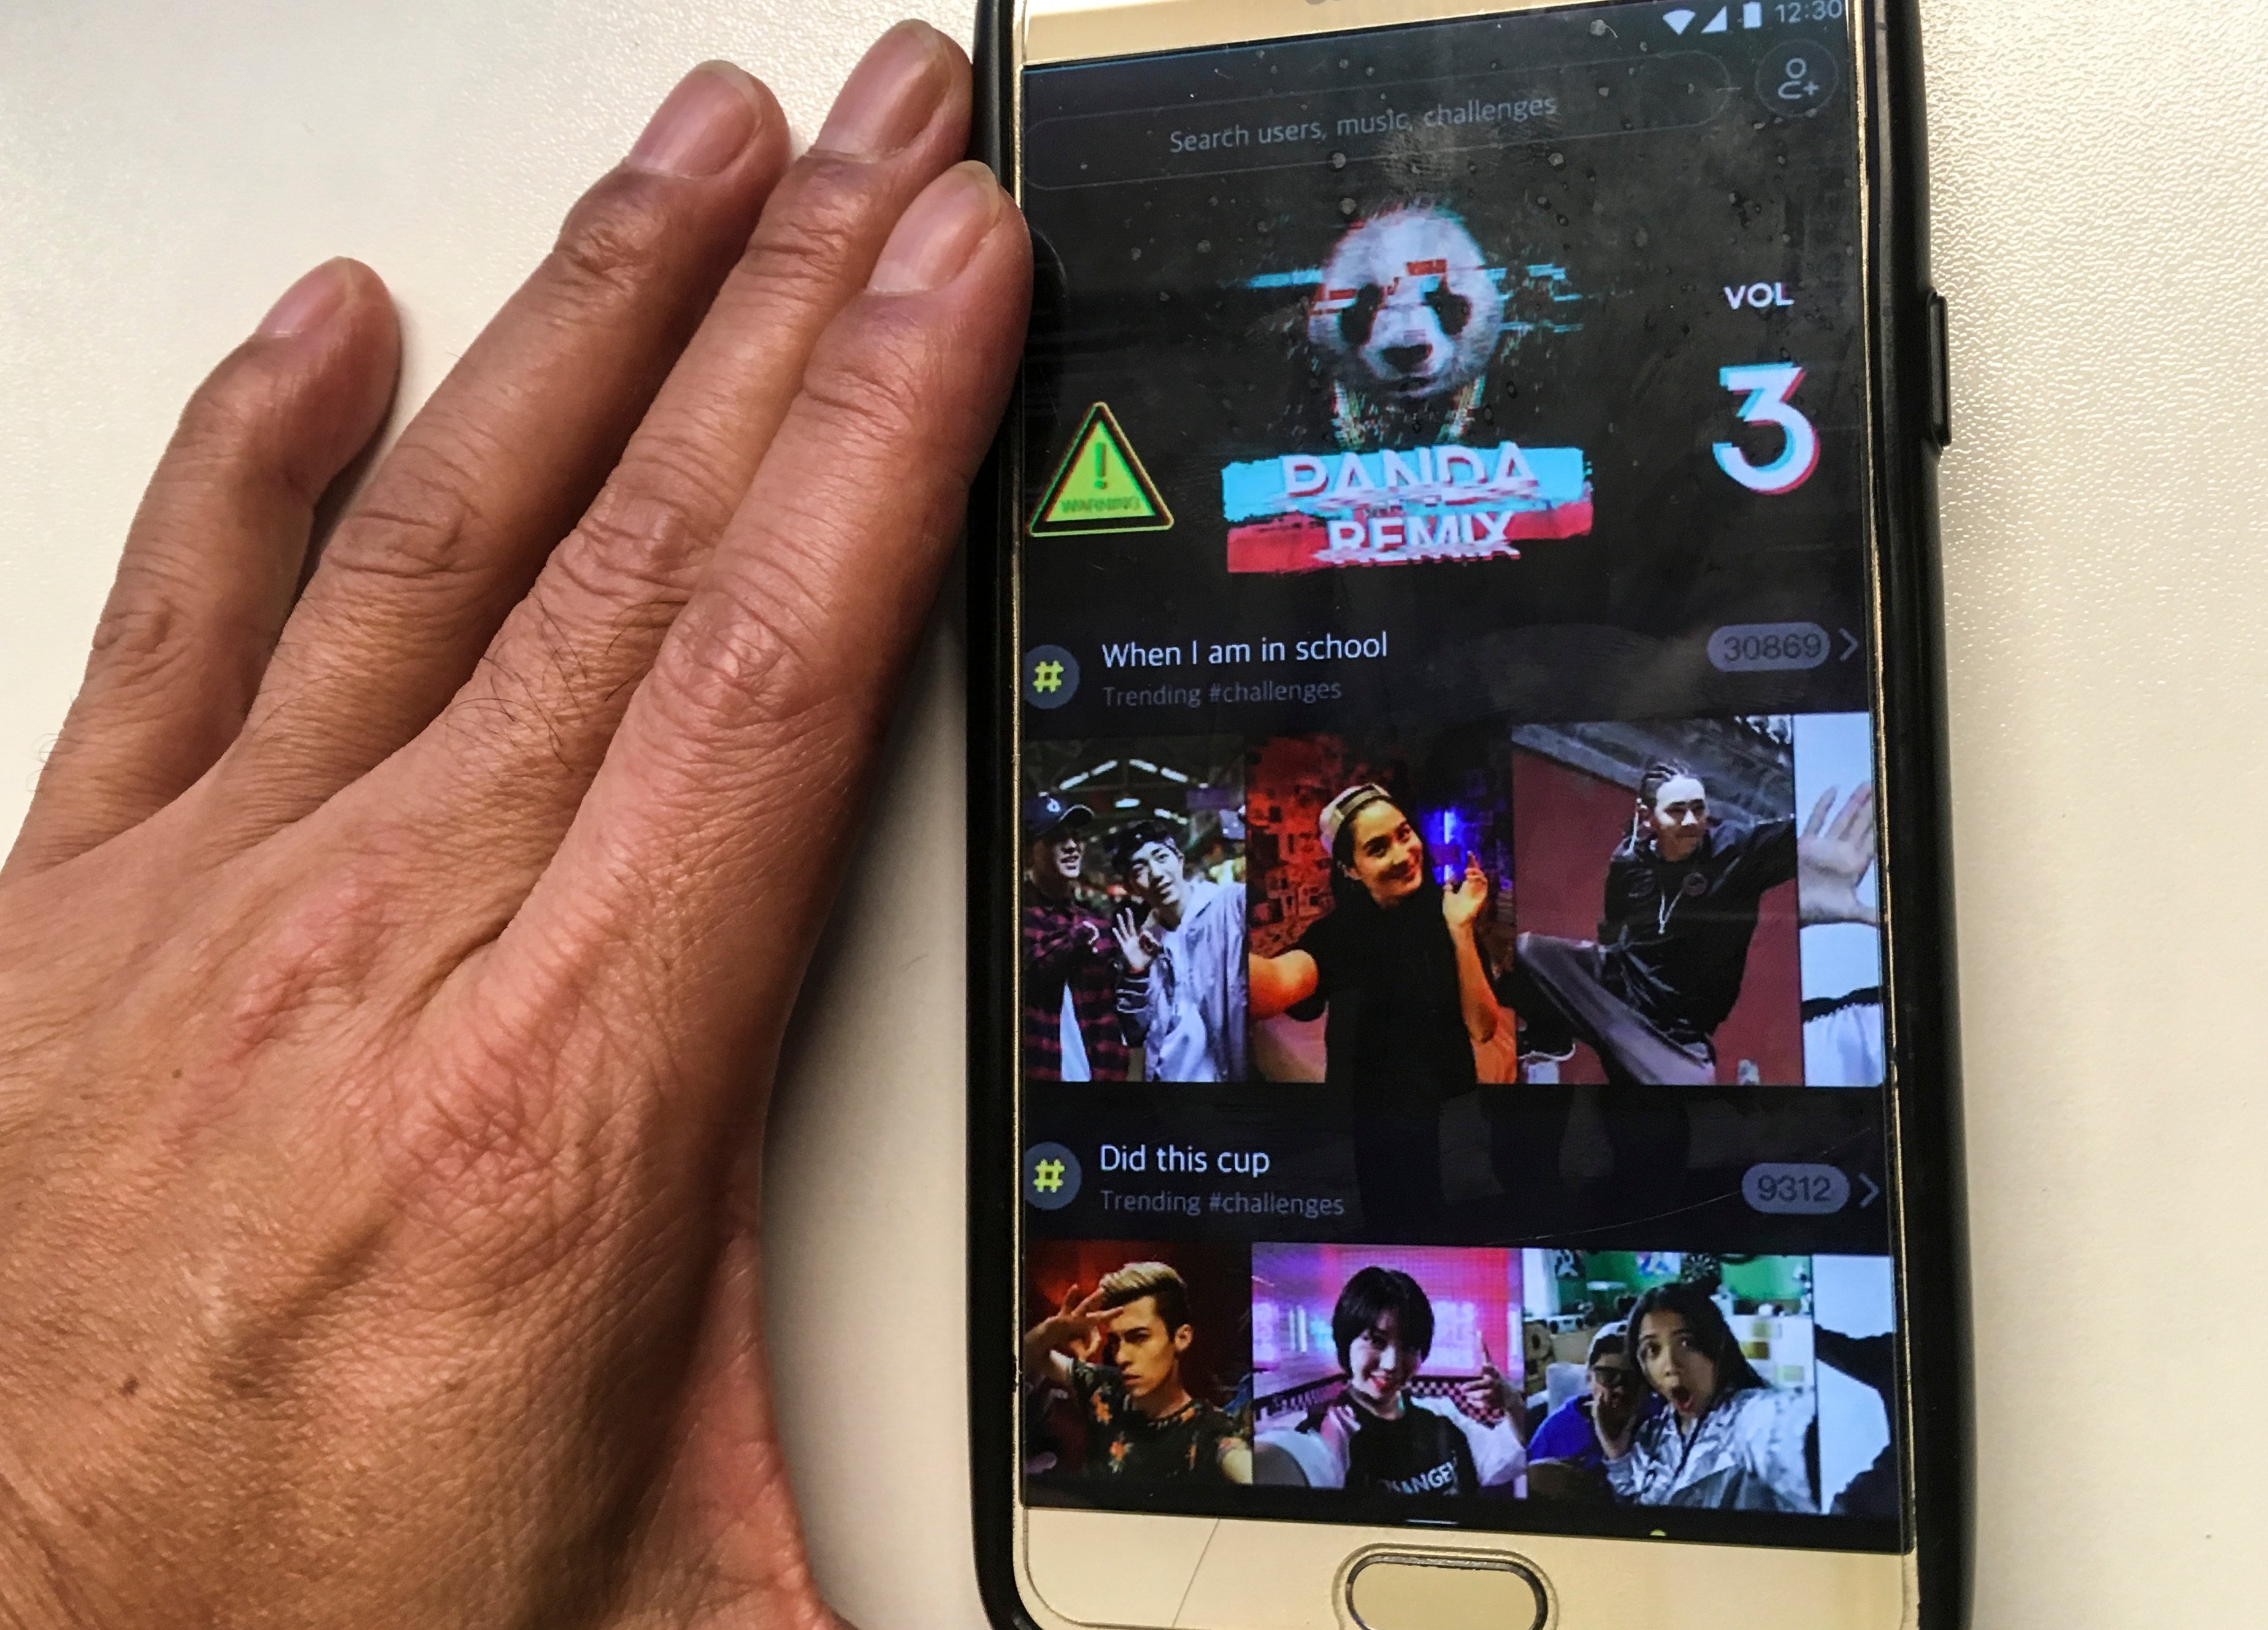 TikTok is the dominant short video platform in the world. Its Chinese version, Douyin, and many other similar apps rule China. (Picture: SCMP)